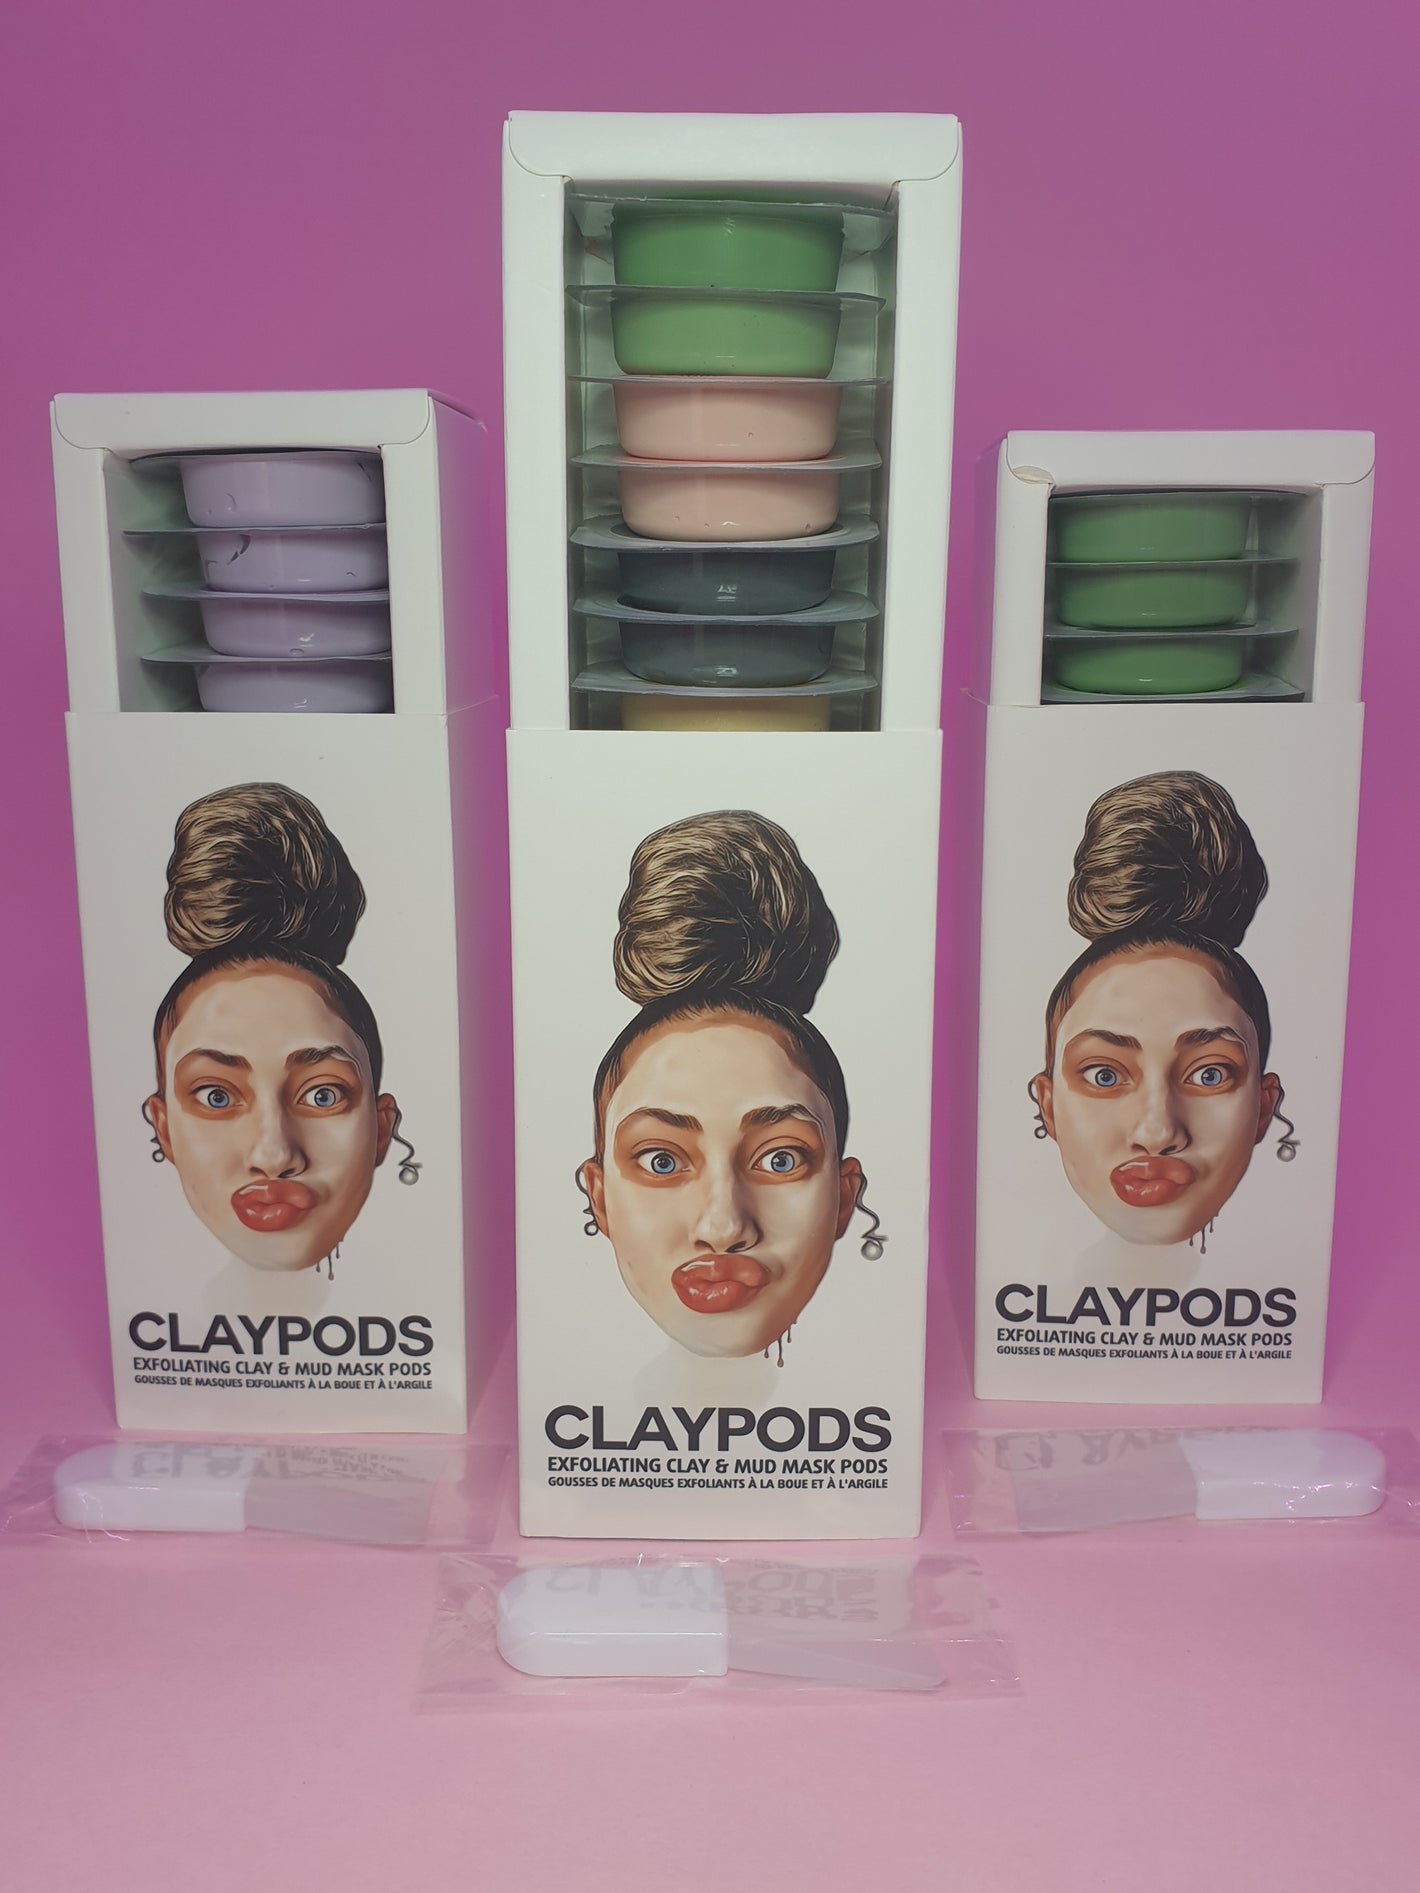 3 boxes of clay pods with mud mask brushes. Eggplant, Dead Sea and Green Tea